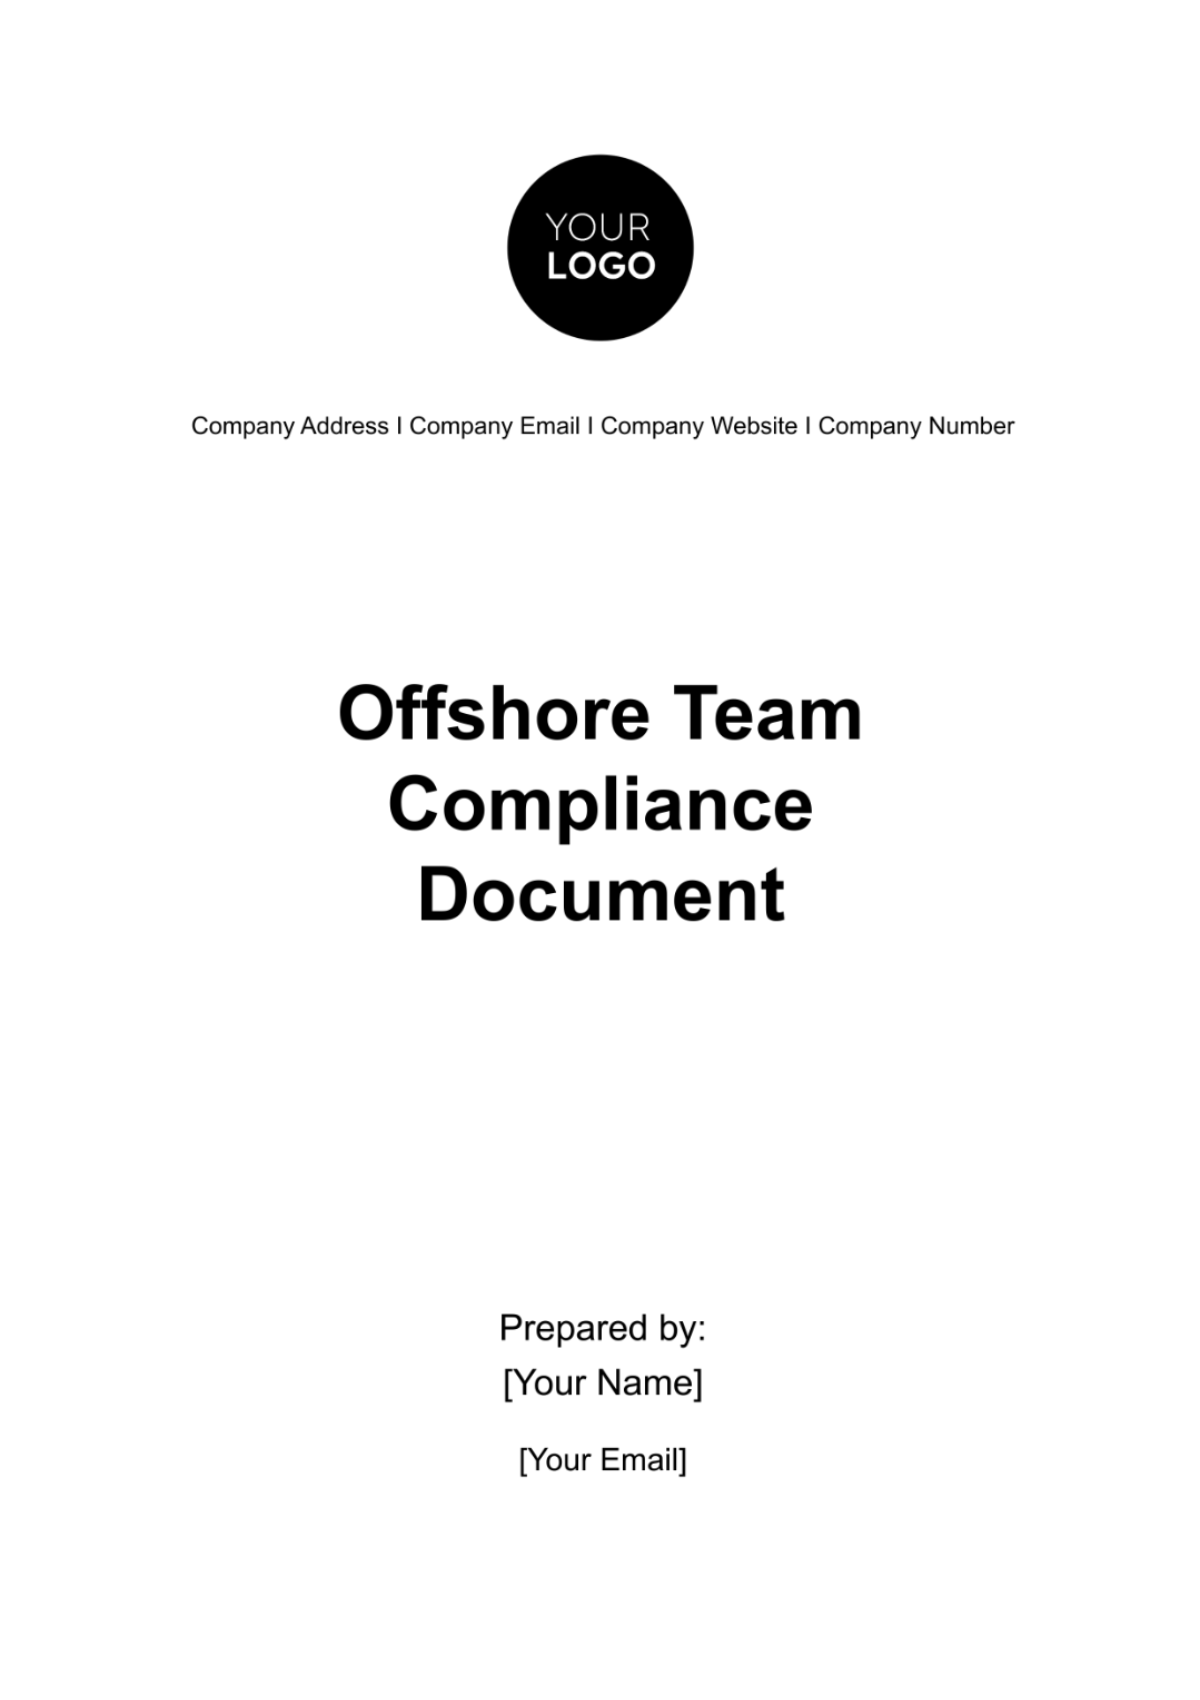 Free Offshore Team Compliance Document HR Template